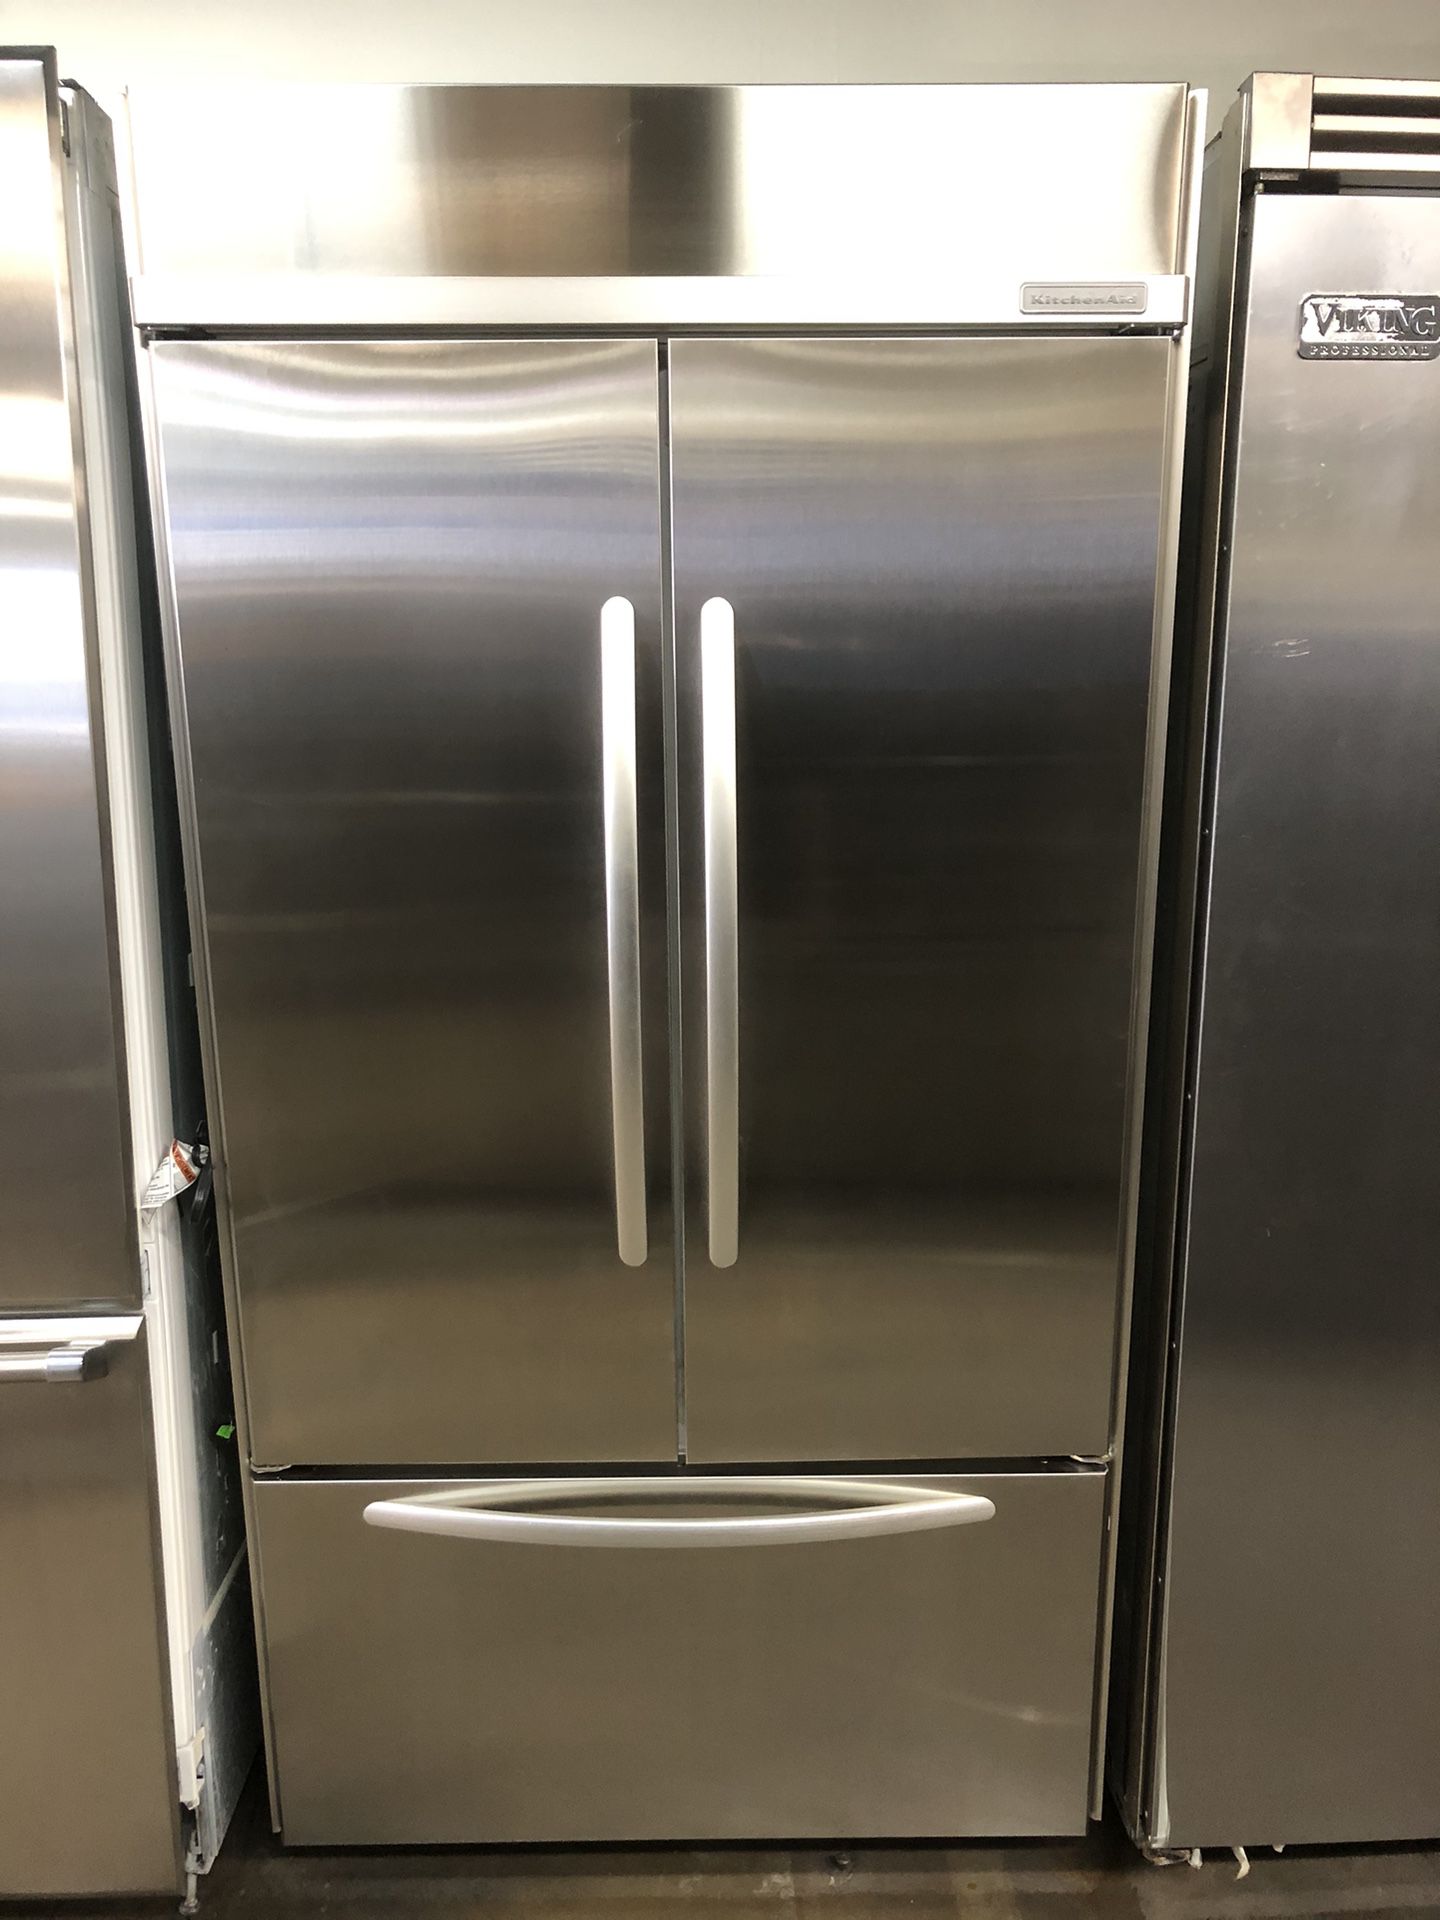 Kitchen Aid 42”wide Stainless Steel French Style Refrigerator 